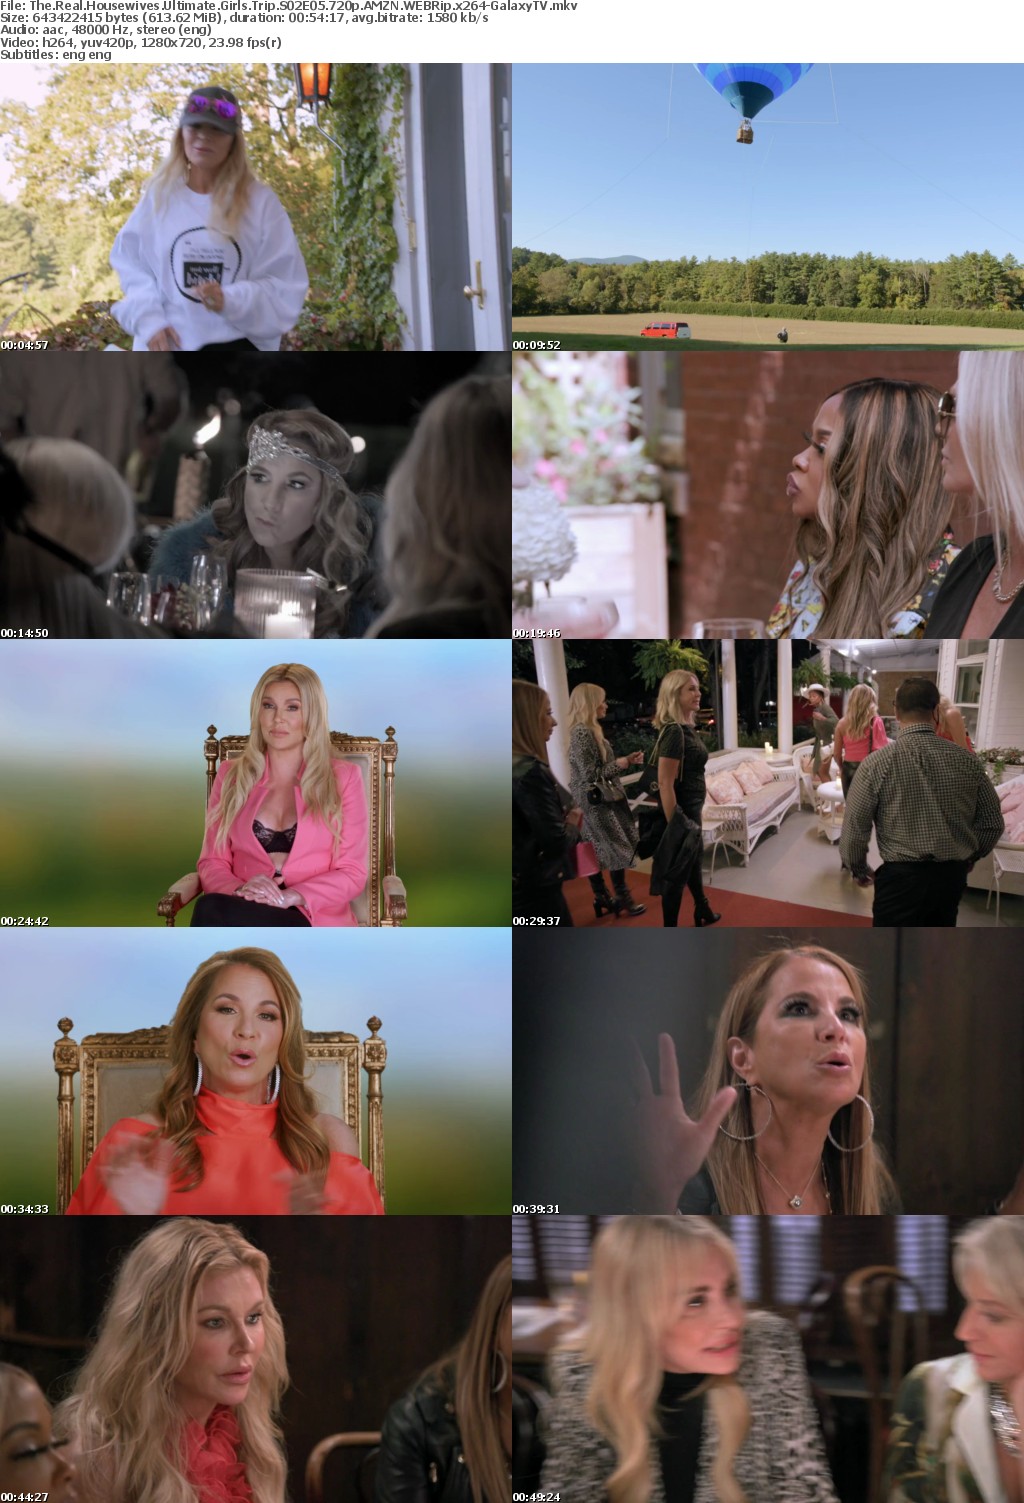 The Real Housewives Ultimate Girls Trip S02 COMPLETE 720p AMZN WEBRip x264-GalaxyTV